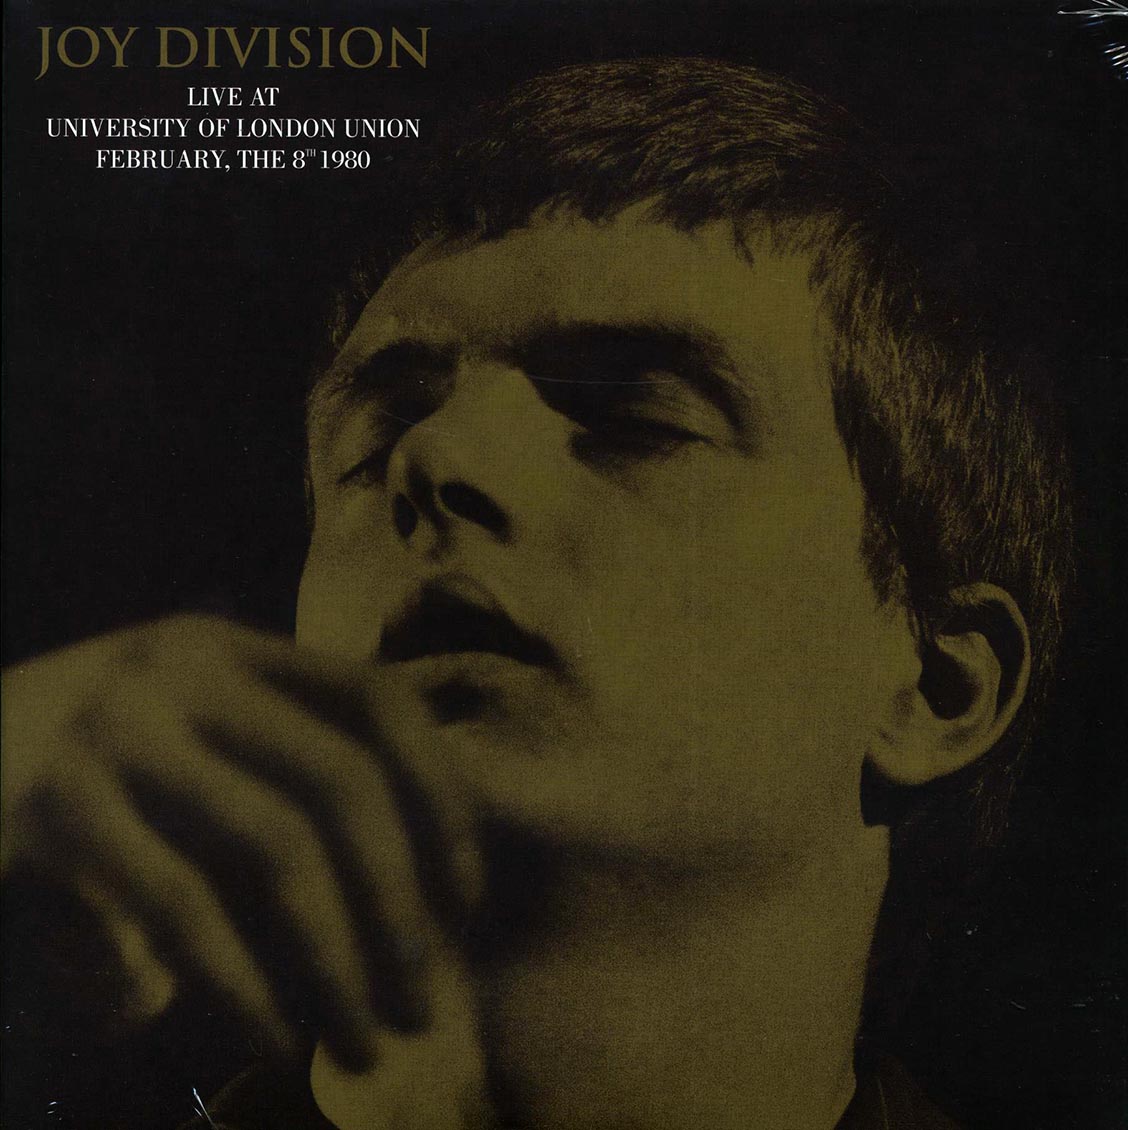 Joy Division - Live At University Of London Union, February, The 8th 1980